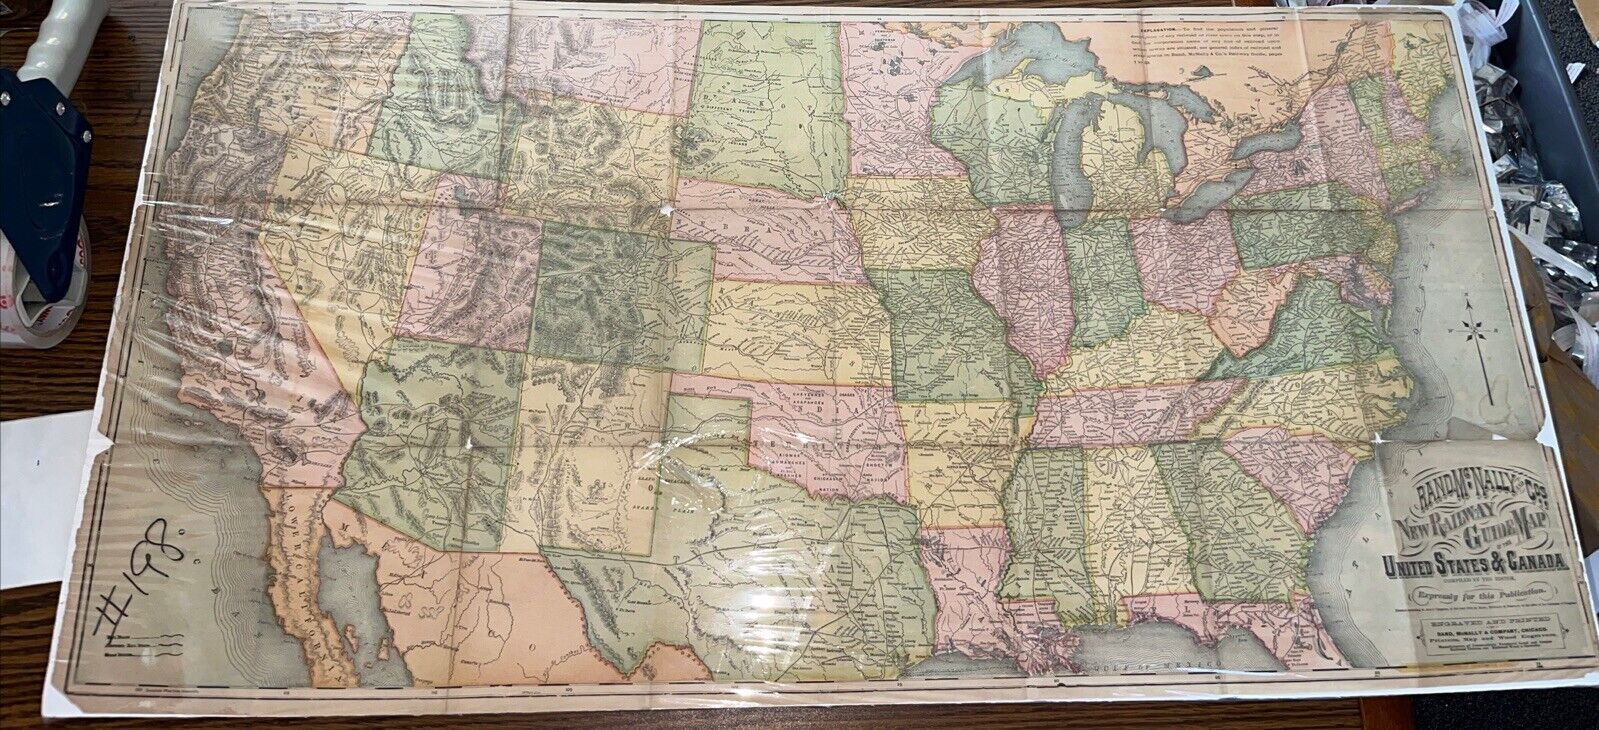 Antique 1873 Rand McNally New Railway to Guide Map of the United States & Canada